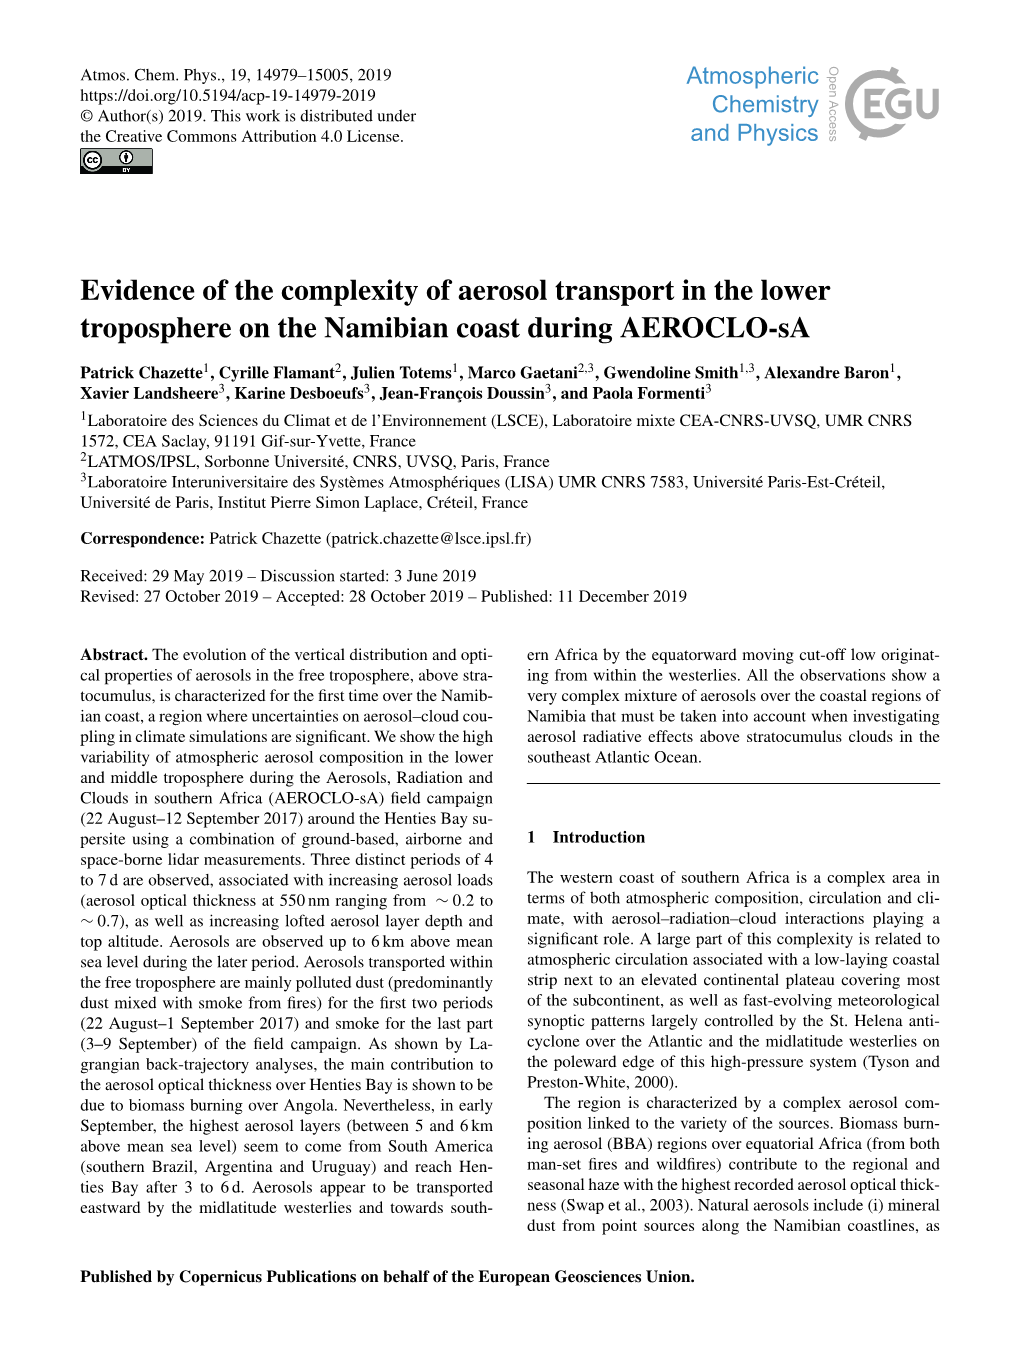 Evidence of the Complexity of Aerosol Transport in the Lower Troposphere on the Namibian Coast During AEROCLO-Sa